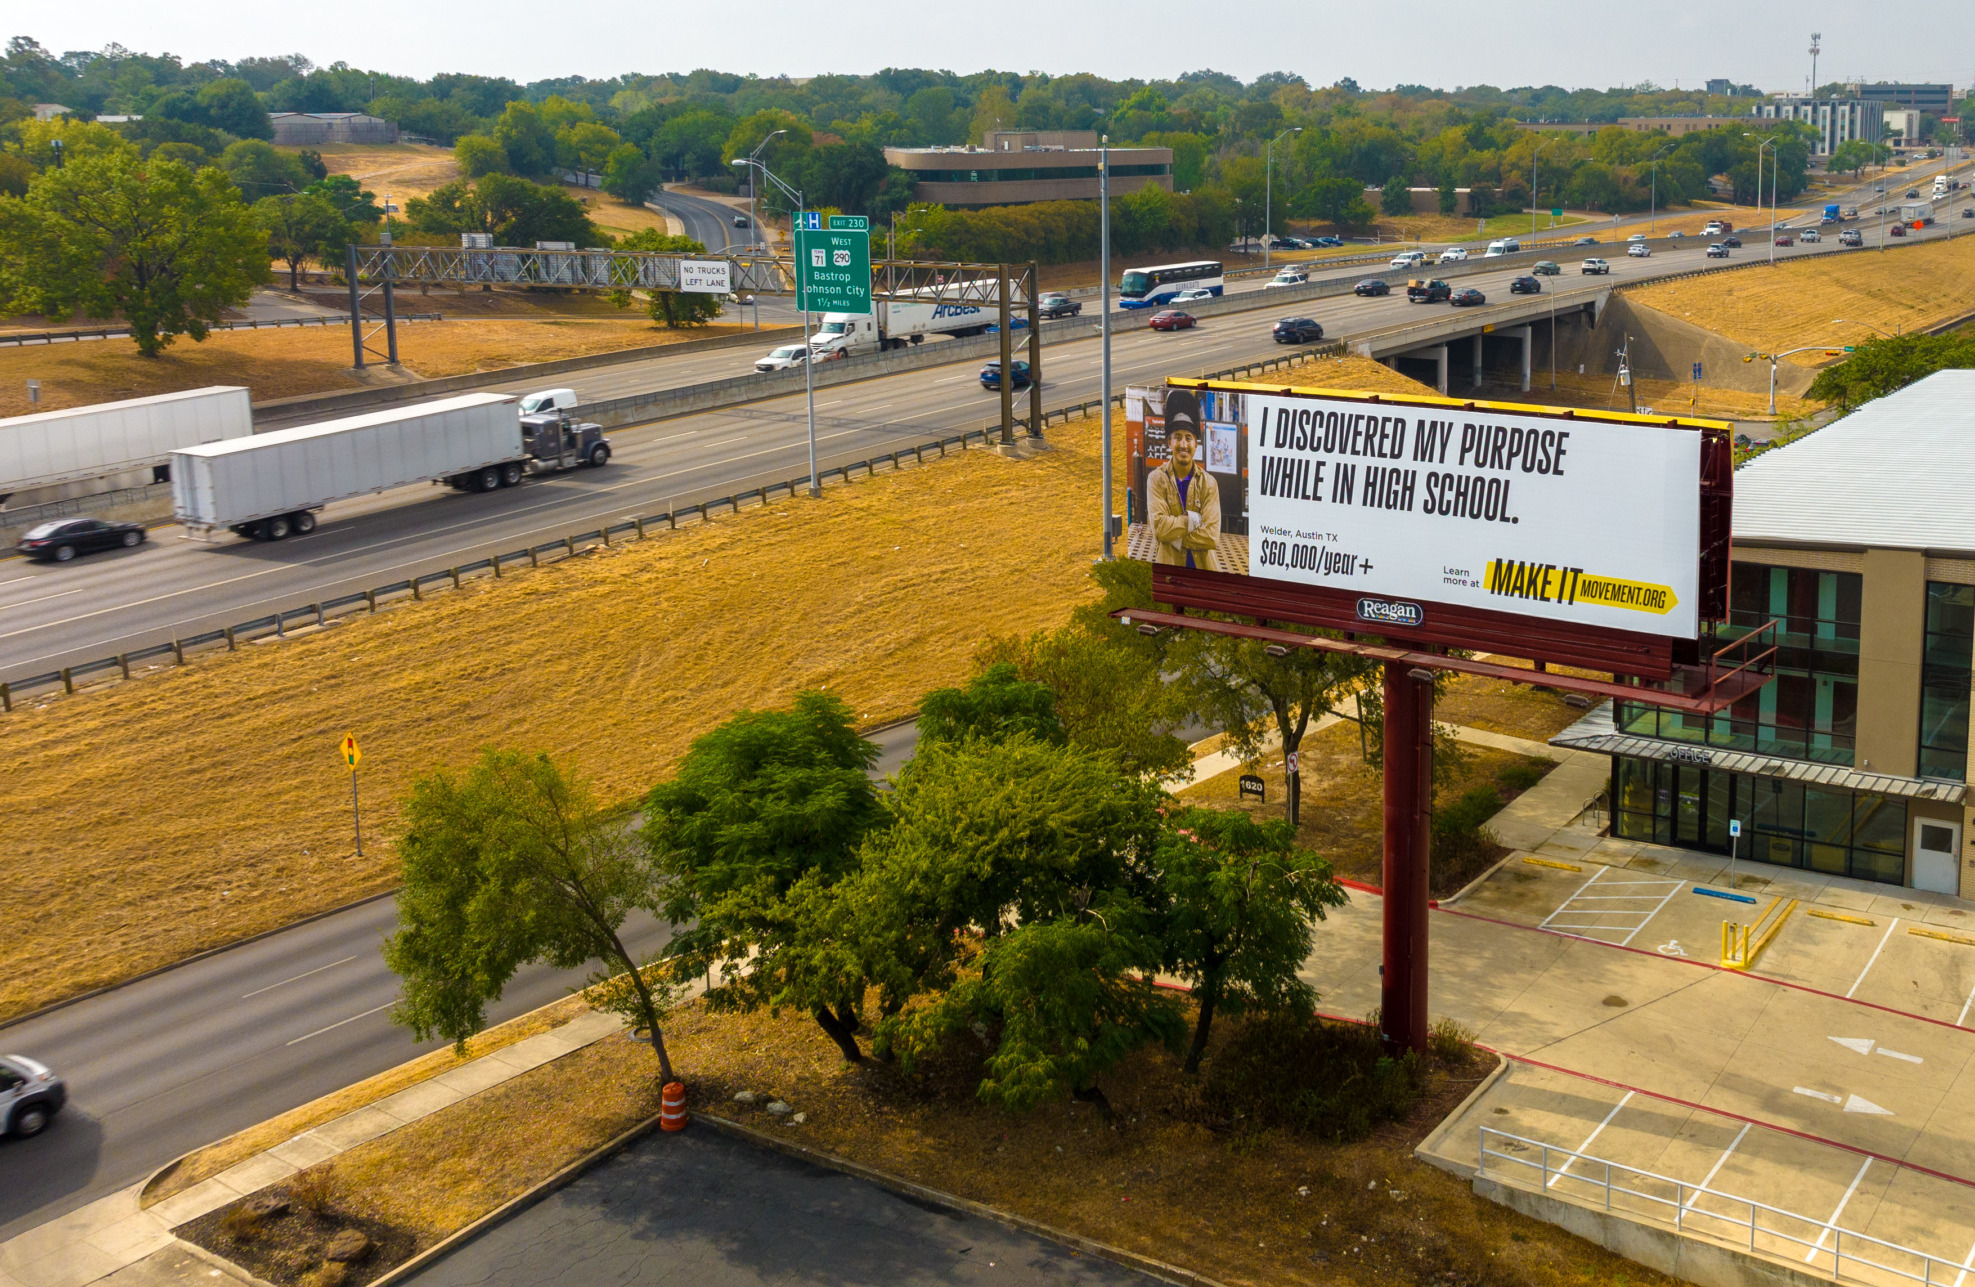 College campaign: Ariel view of freeway going through small town with billboard in foreground with image of person on left side and text "I discovered my purpose while in high school. MakeItMovement $60,000/year+"